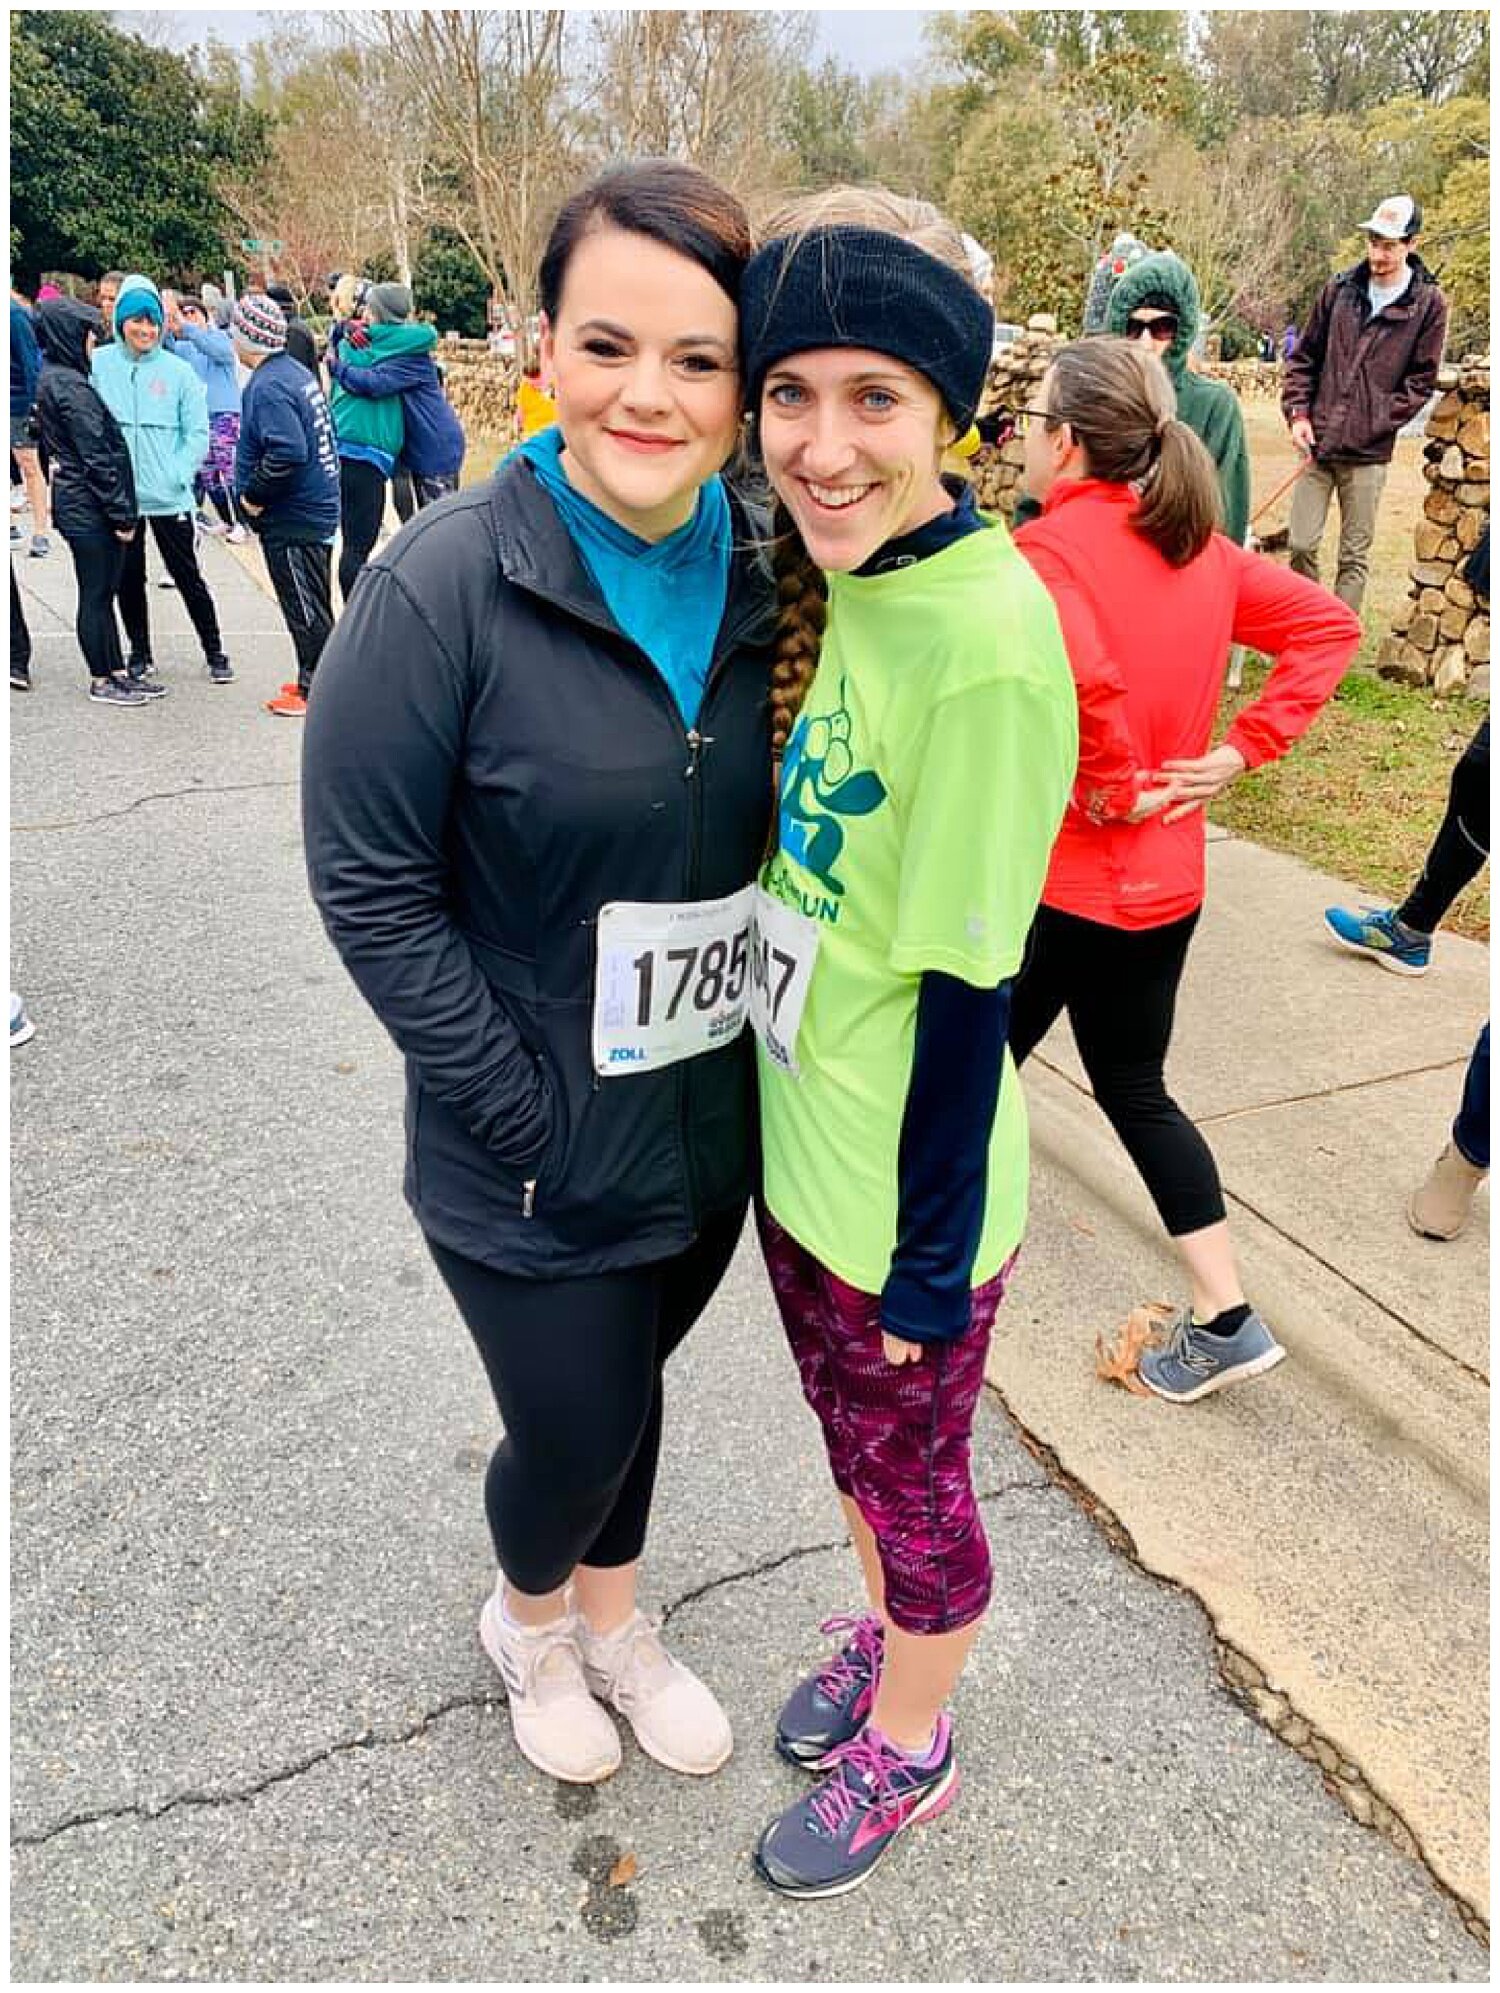  Ran another 5k. So thankful for this sweet, Godly friendship. 